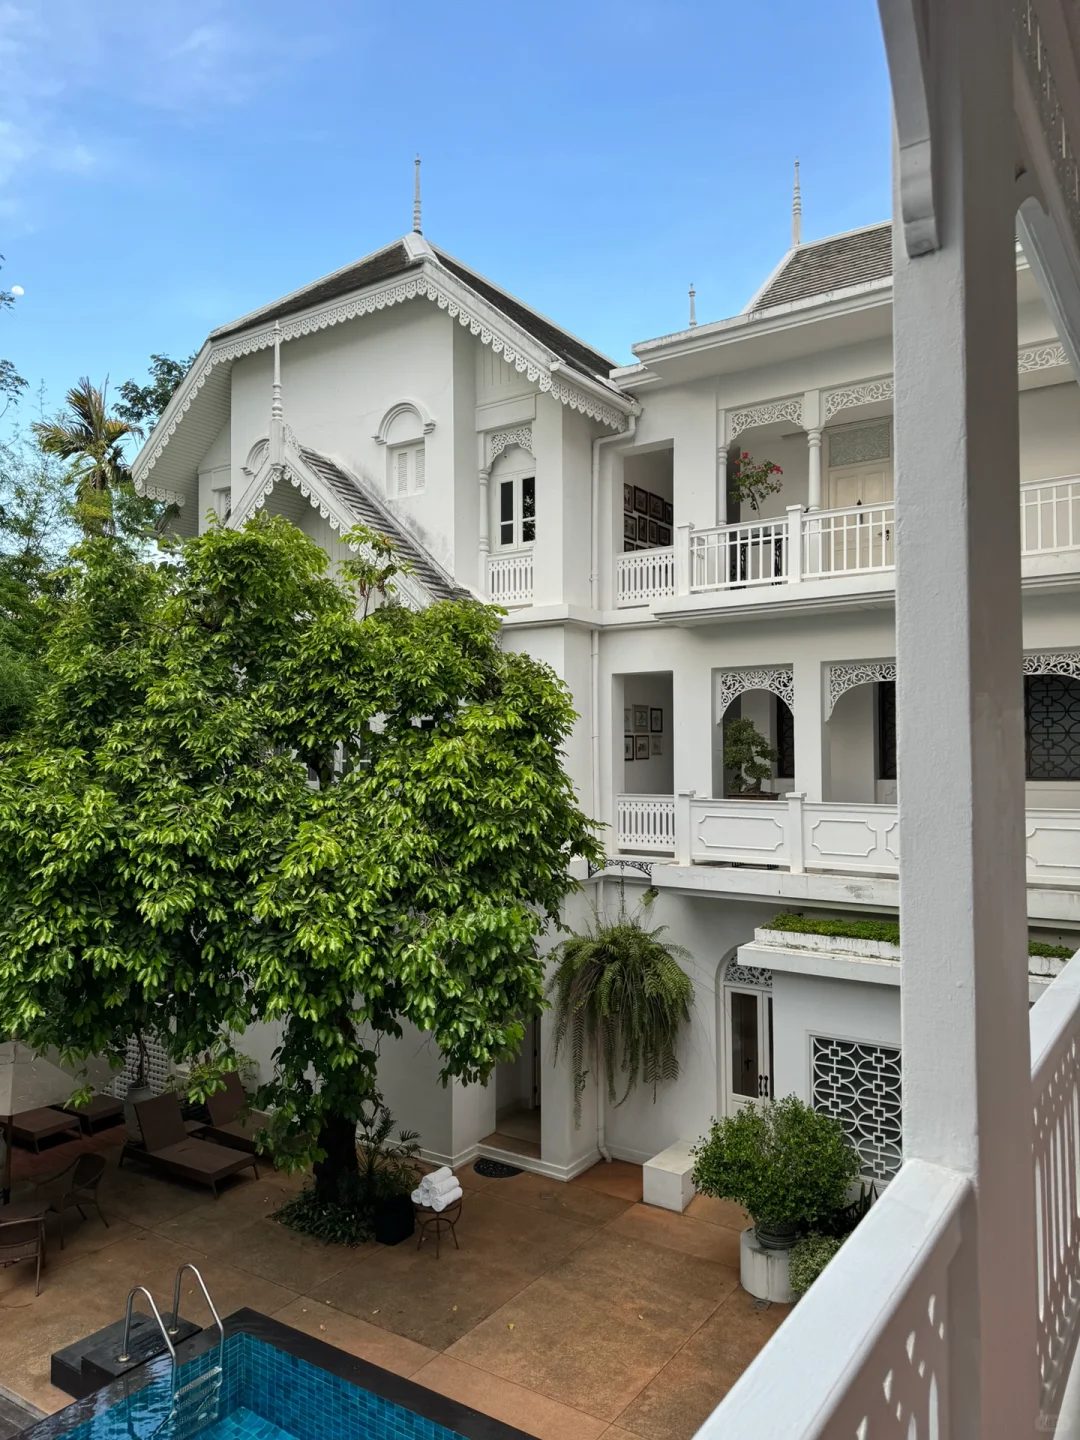 ChiangMai-Ping Nakara Boutique Hotel & Spa, located in the heart of Chiang Mai's ancient city